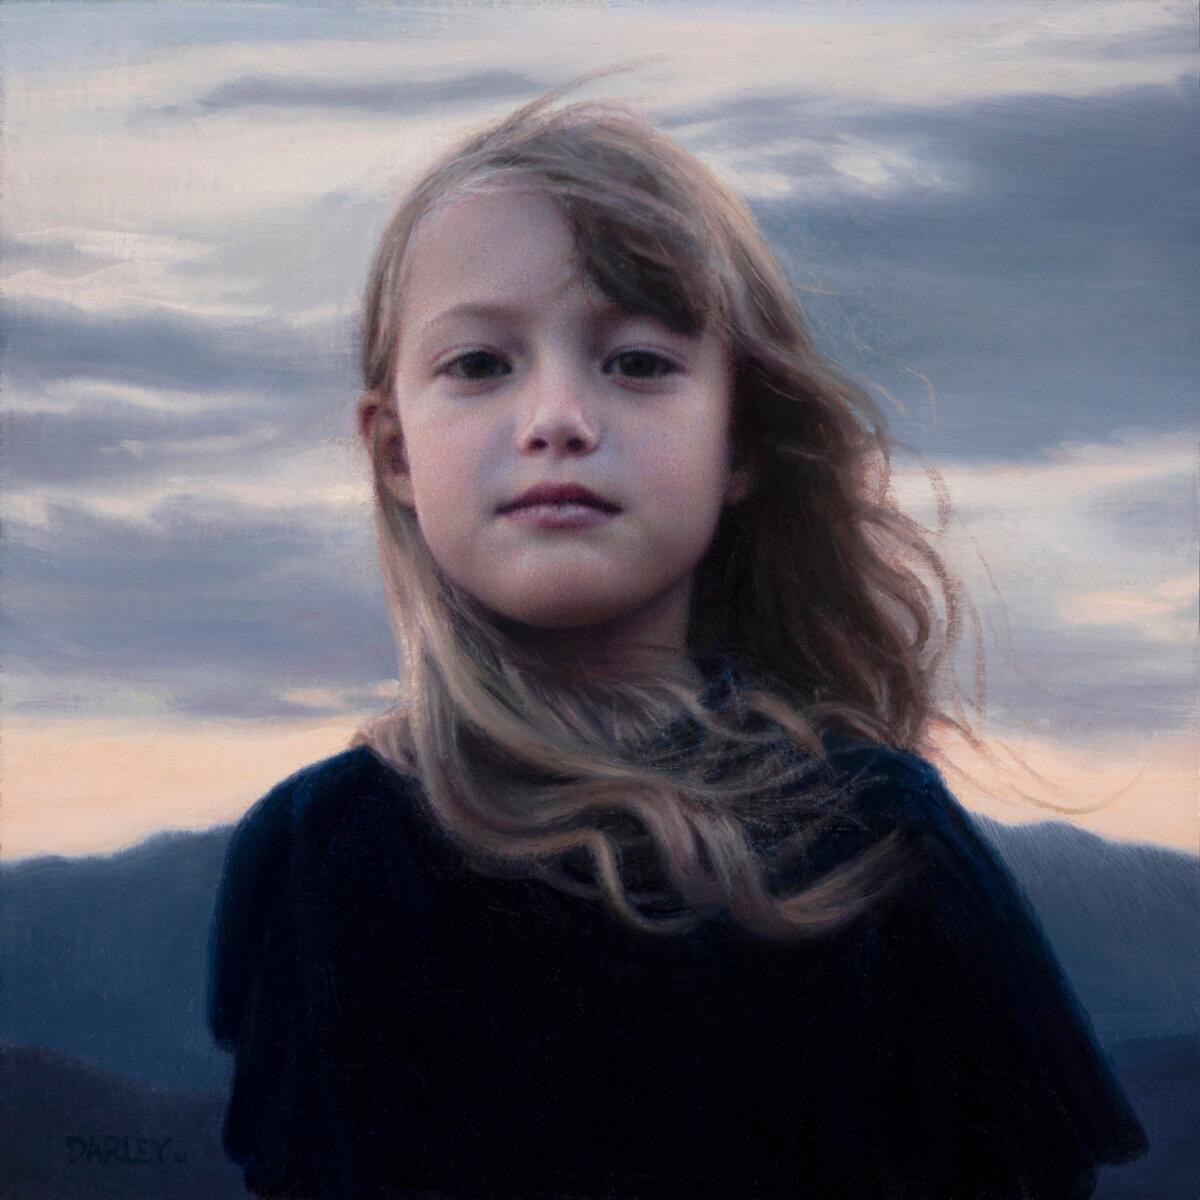 "Vivian” by John Darley. Oil on linen; 14 inches by 14 inches. (Courtesy of John Darley)